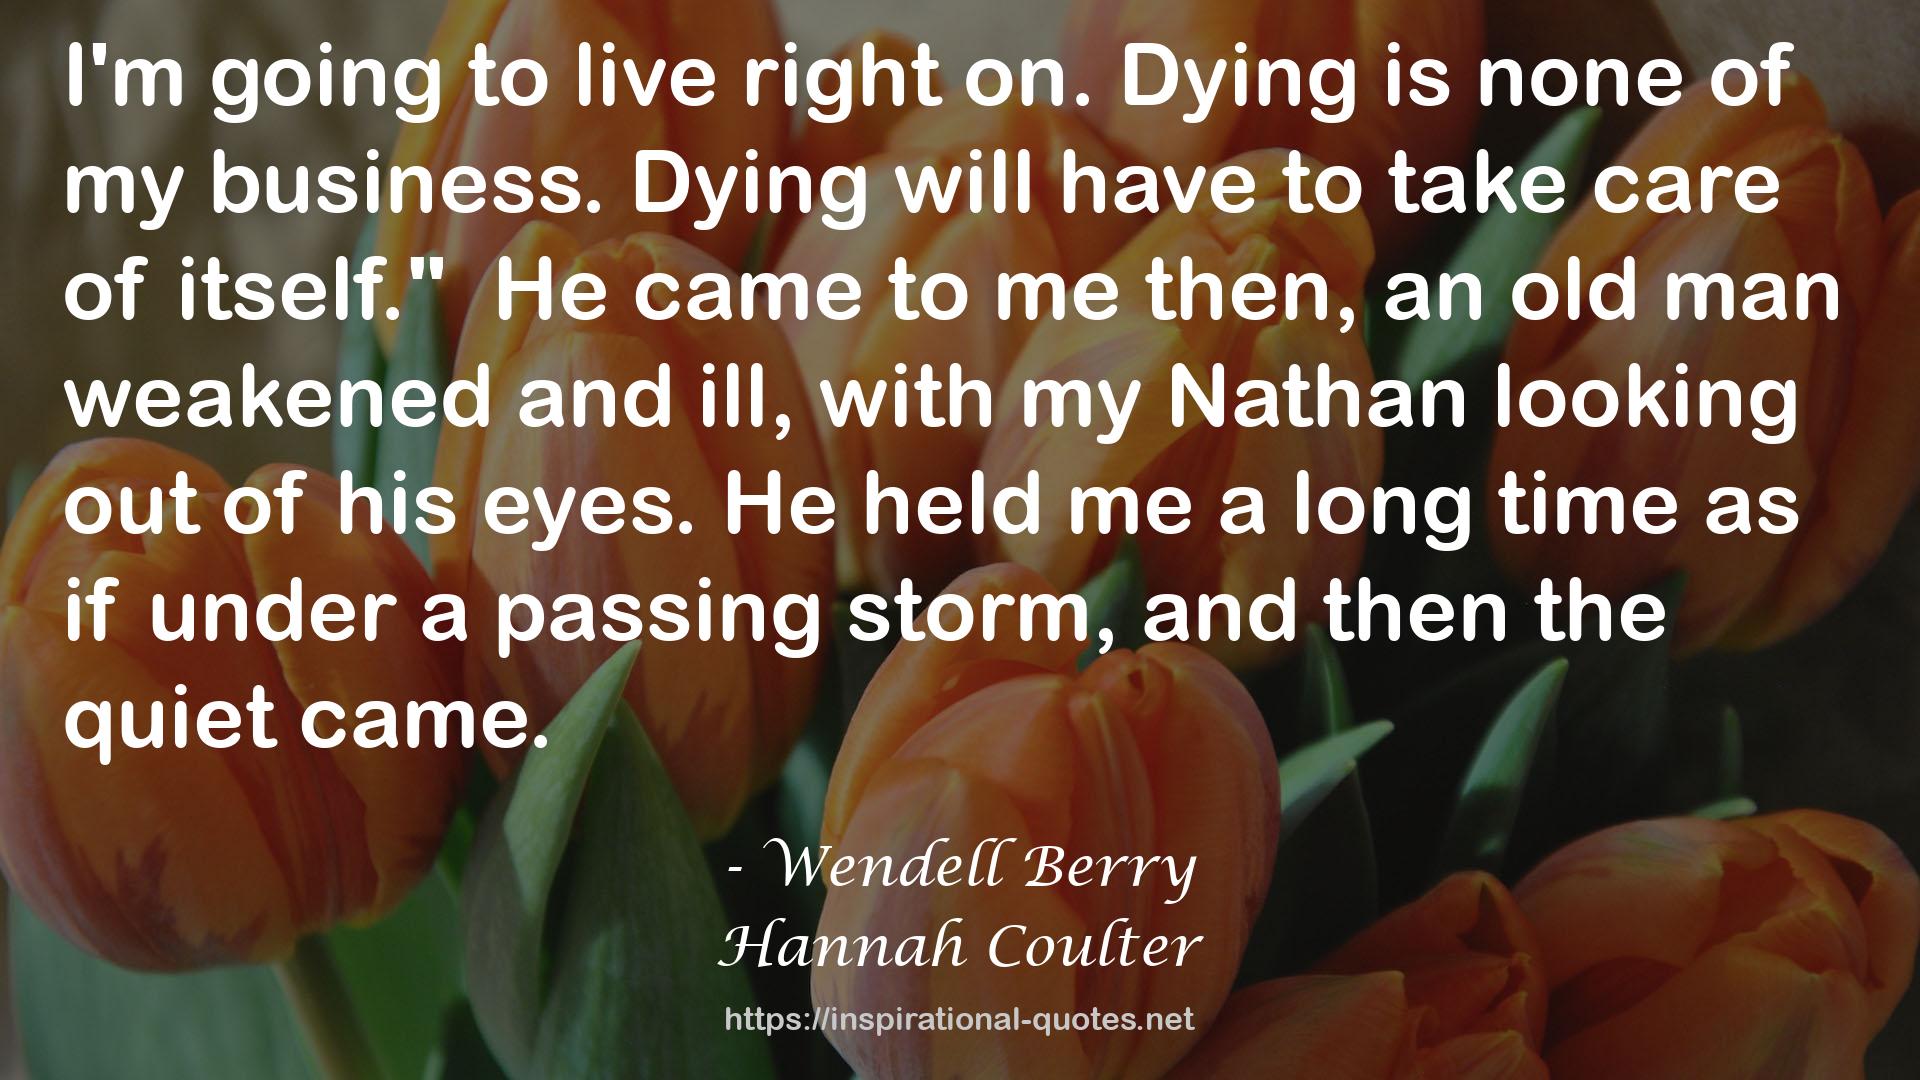 Hannah Coulter QUOTES